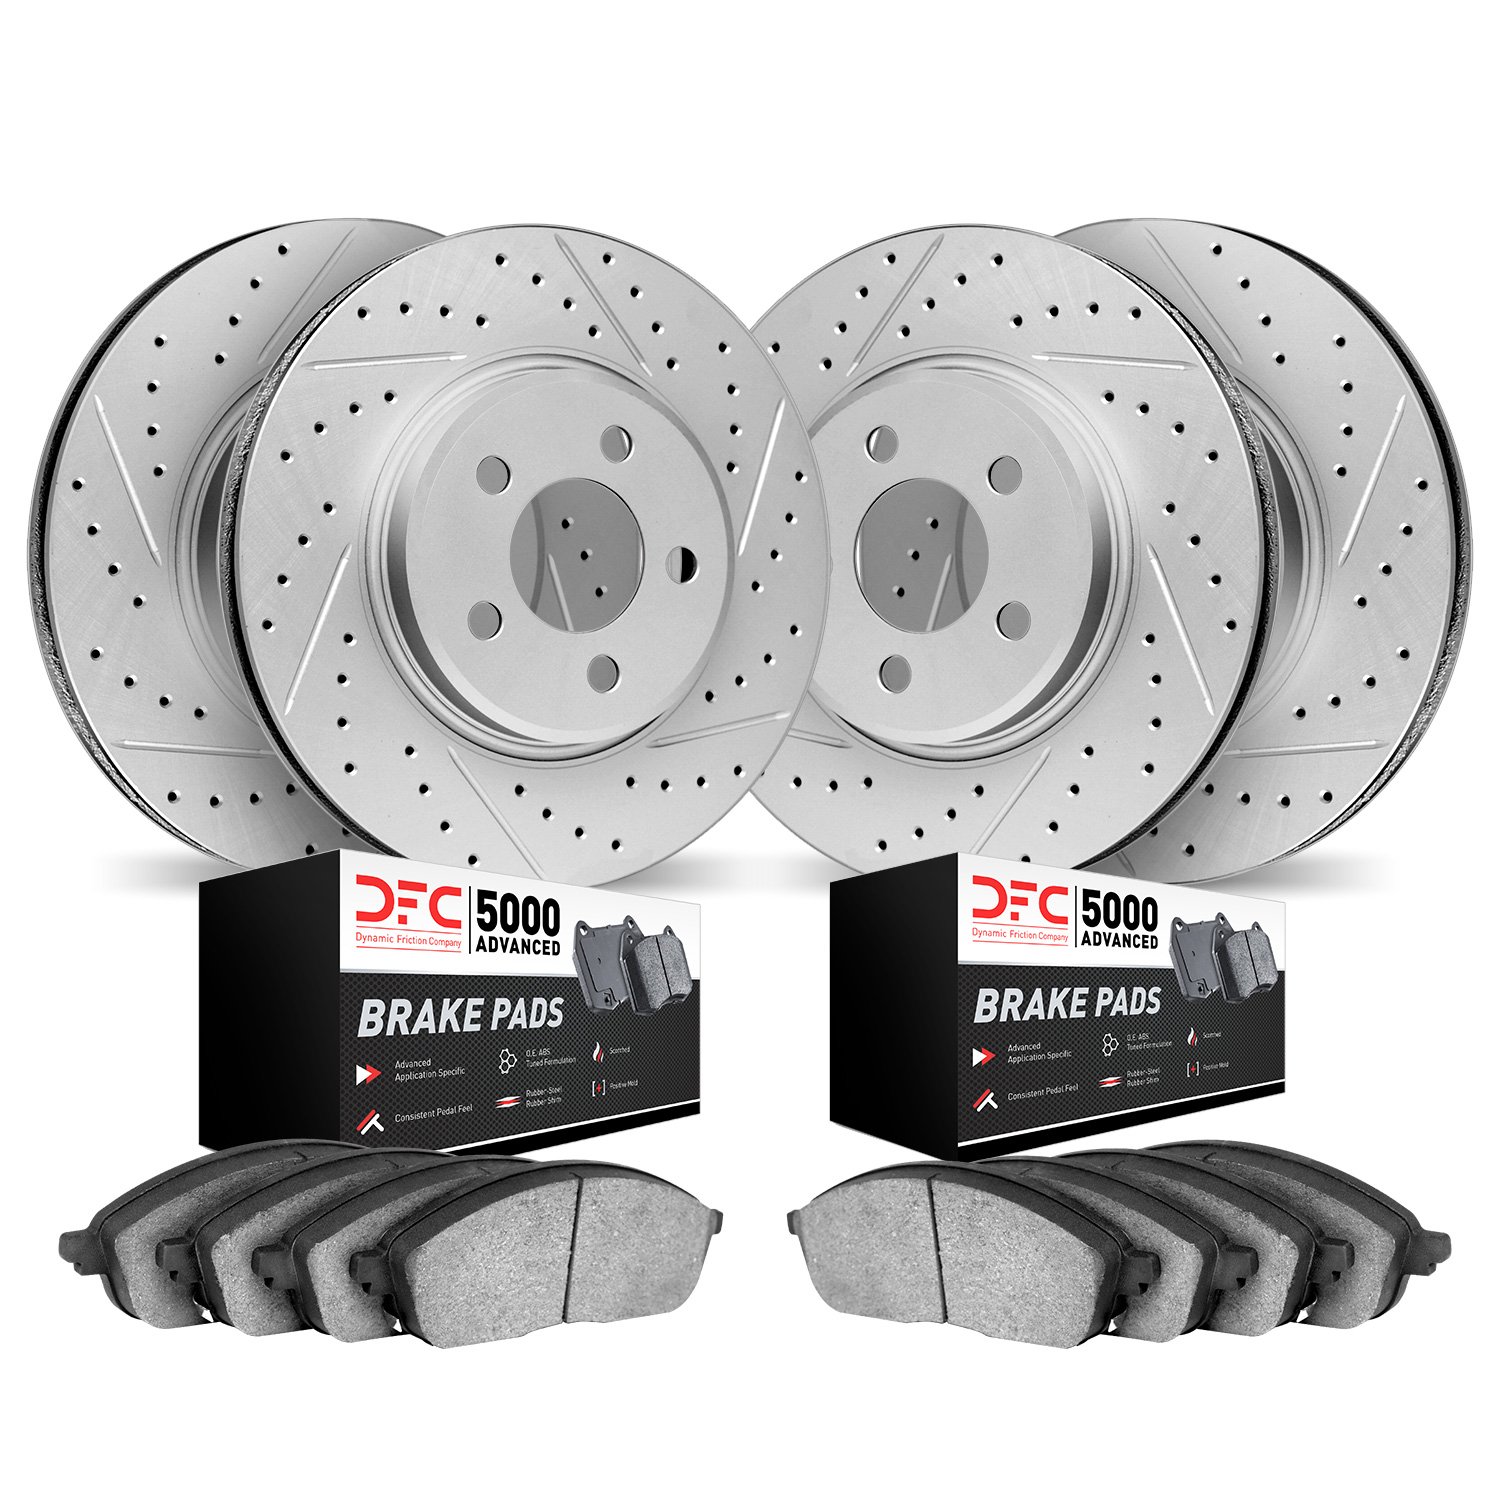 2504-54222 Geoperformance Drilled/Slotted Rotors w/5000 Advanced Brake Pads Kit, 2007-2008 Ford/Lincoln/Mercury/Mazda, Position: